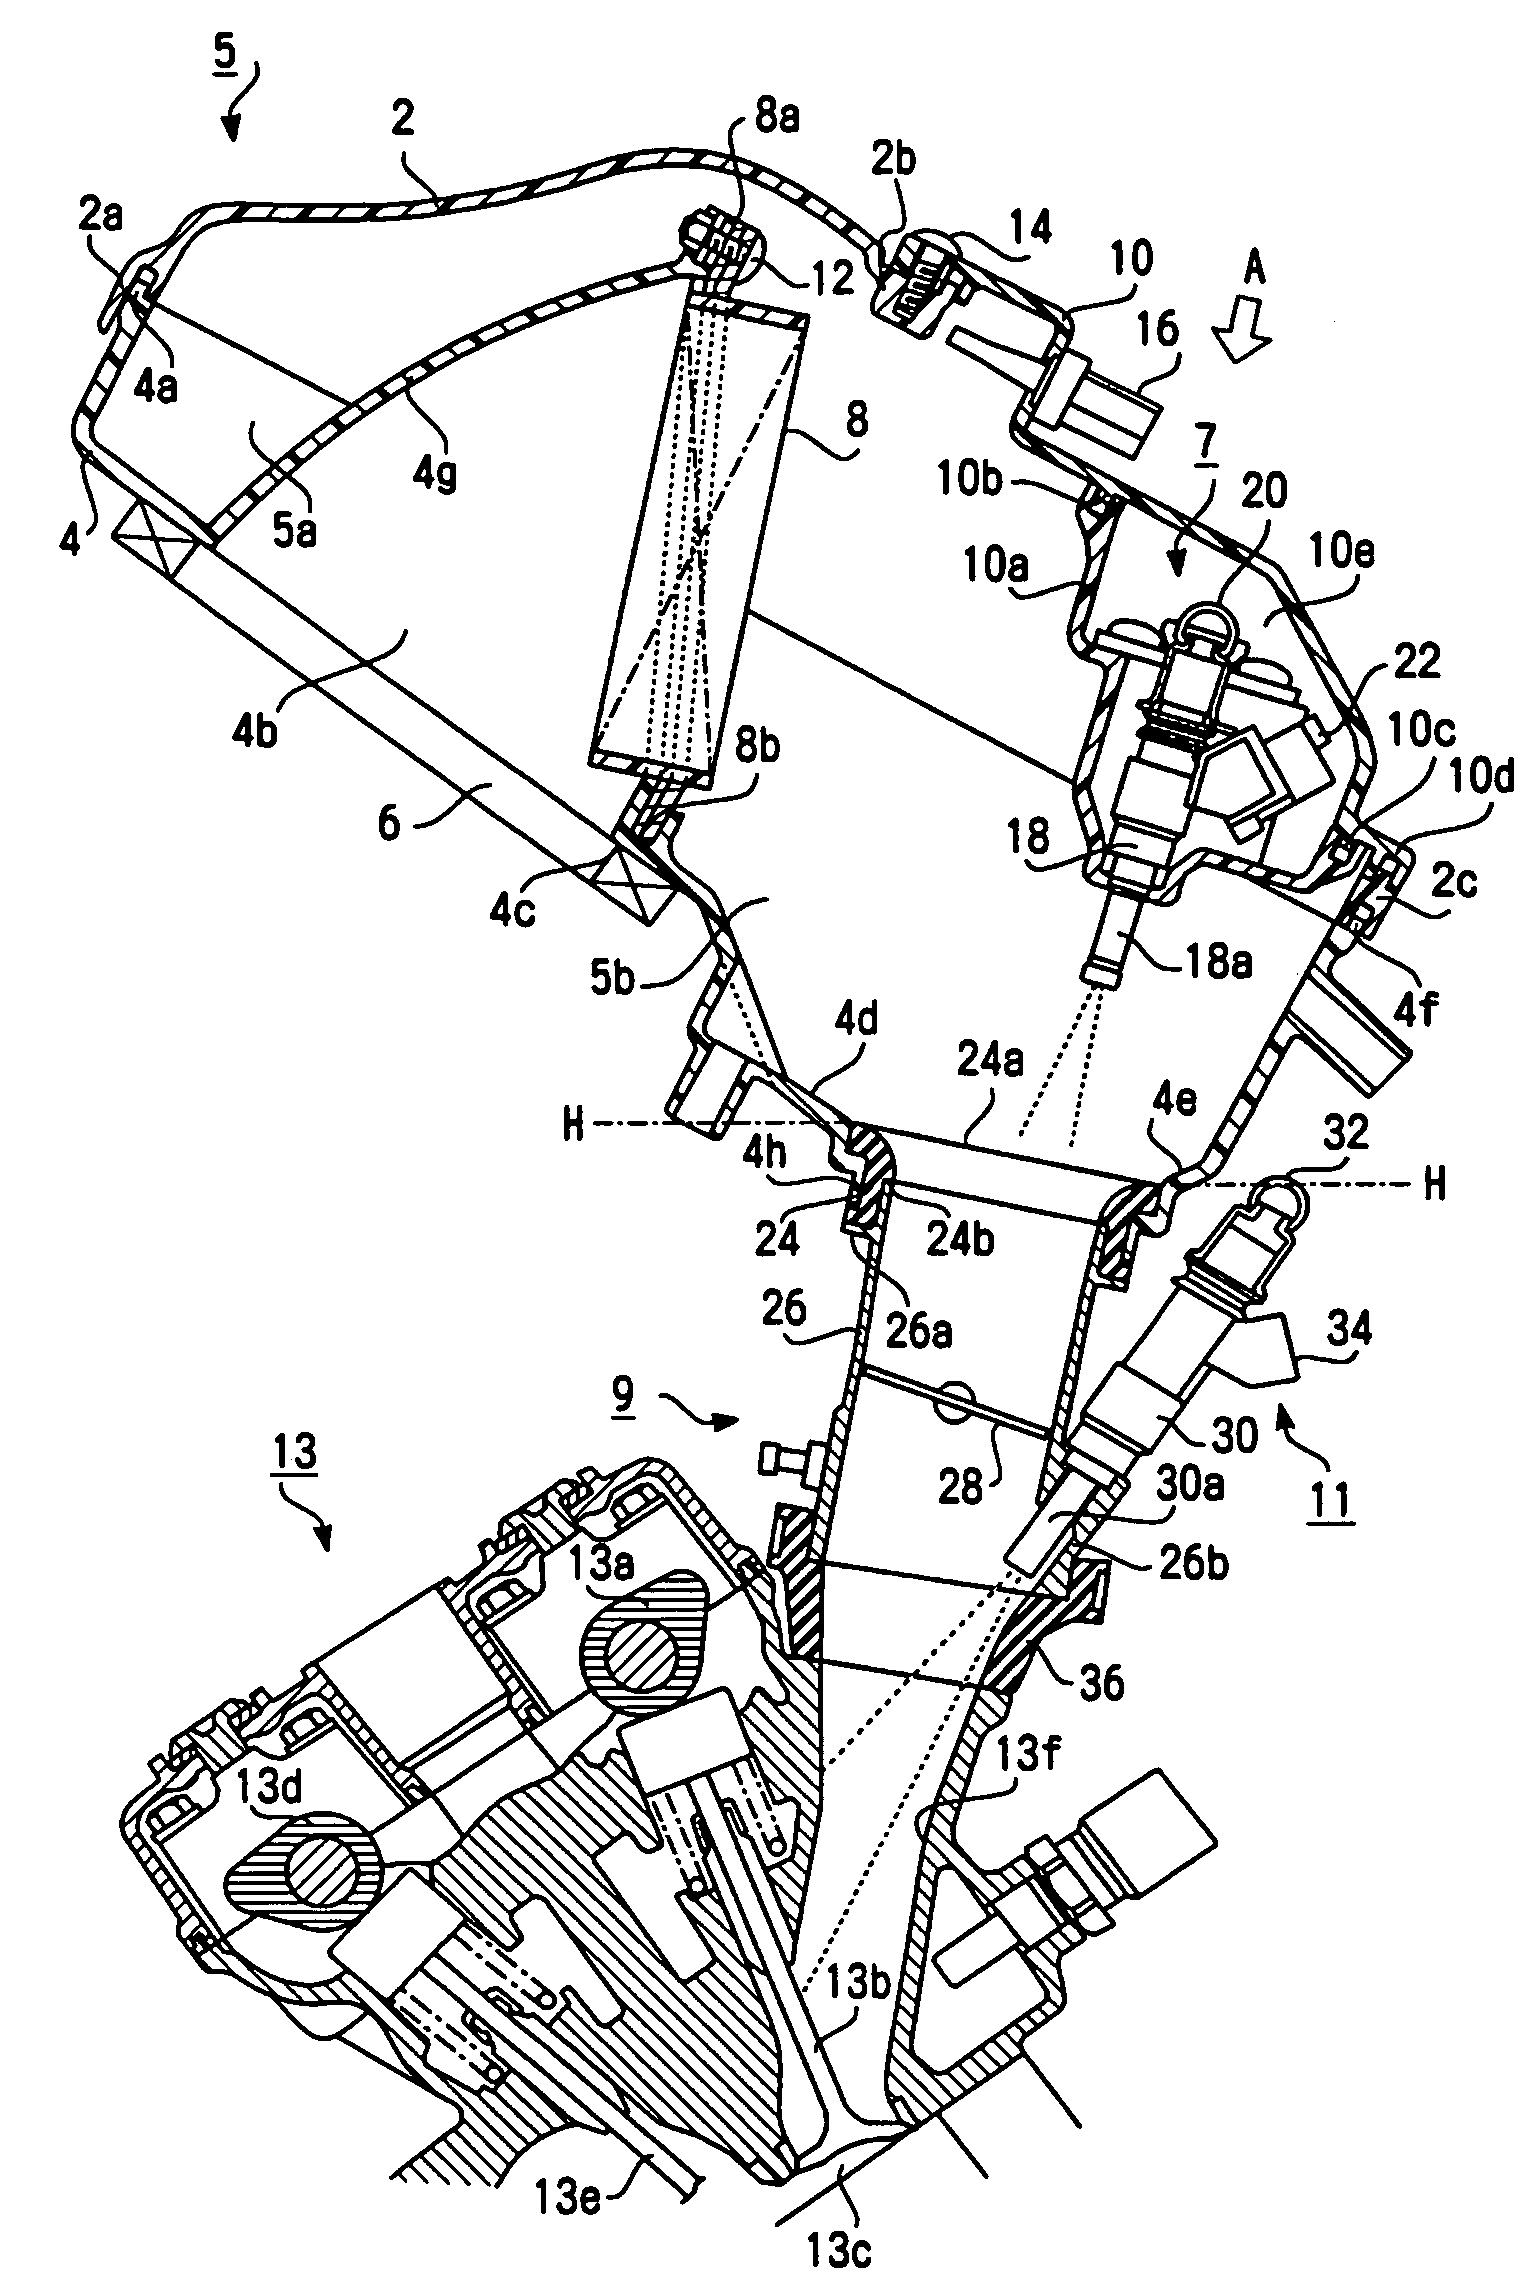 Fuel supply system and vehicle